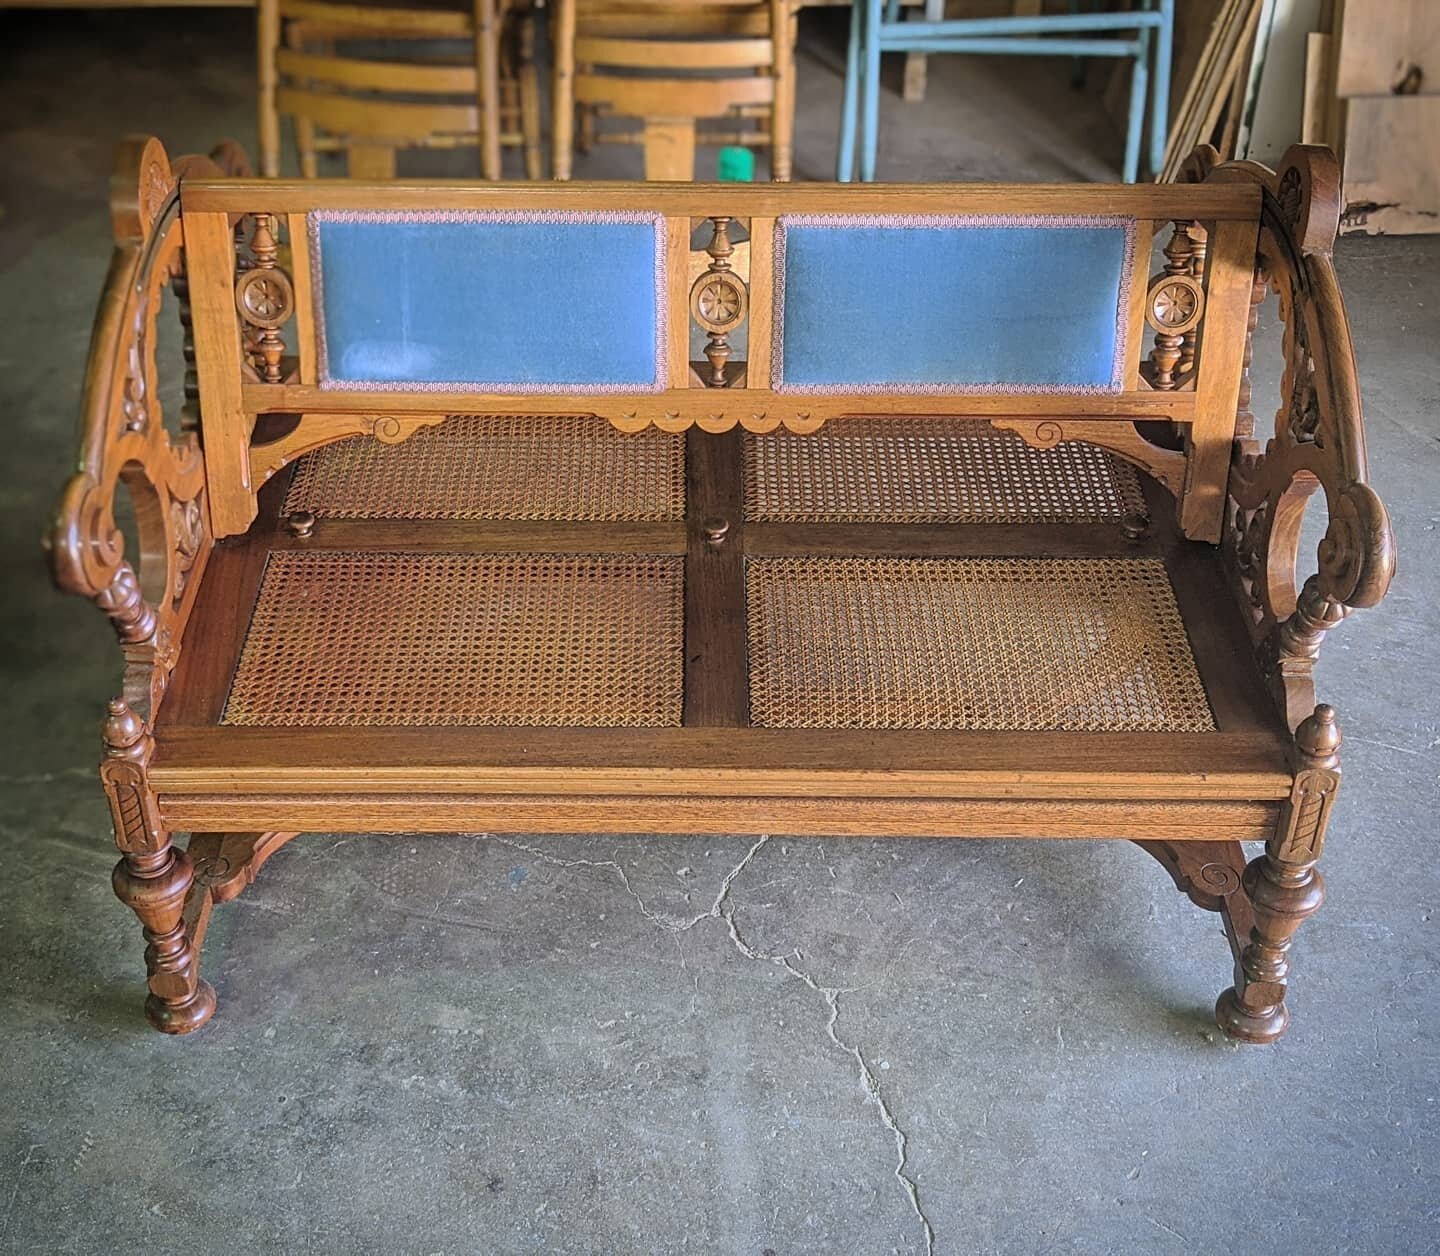 This antique hand caned beauty is done and heading home with a happy customer.

Restoration included new hand caned seats. The new cane blends so well that you would never know it was replaced.